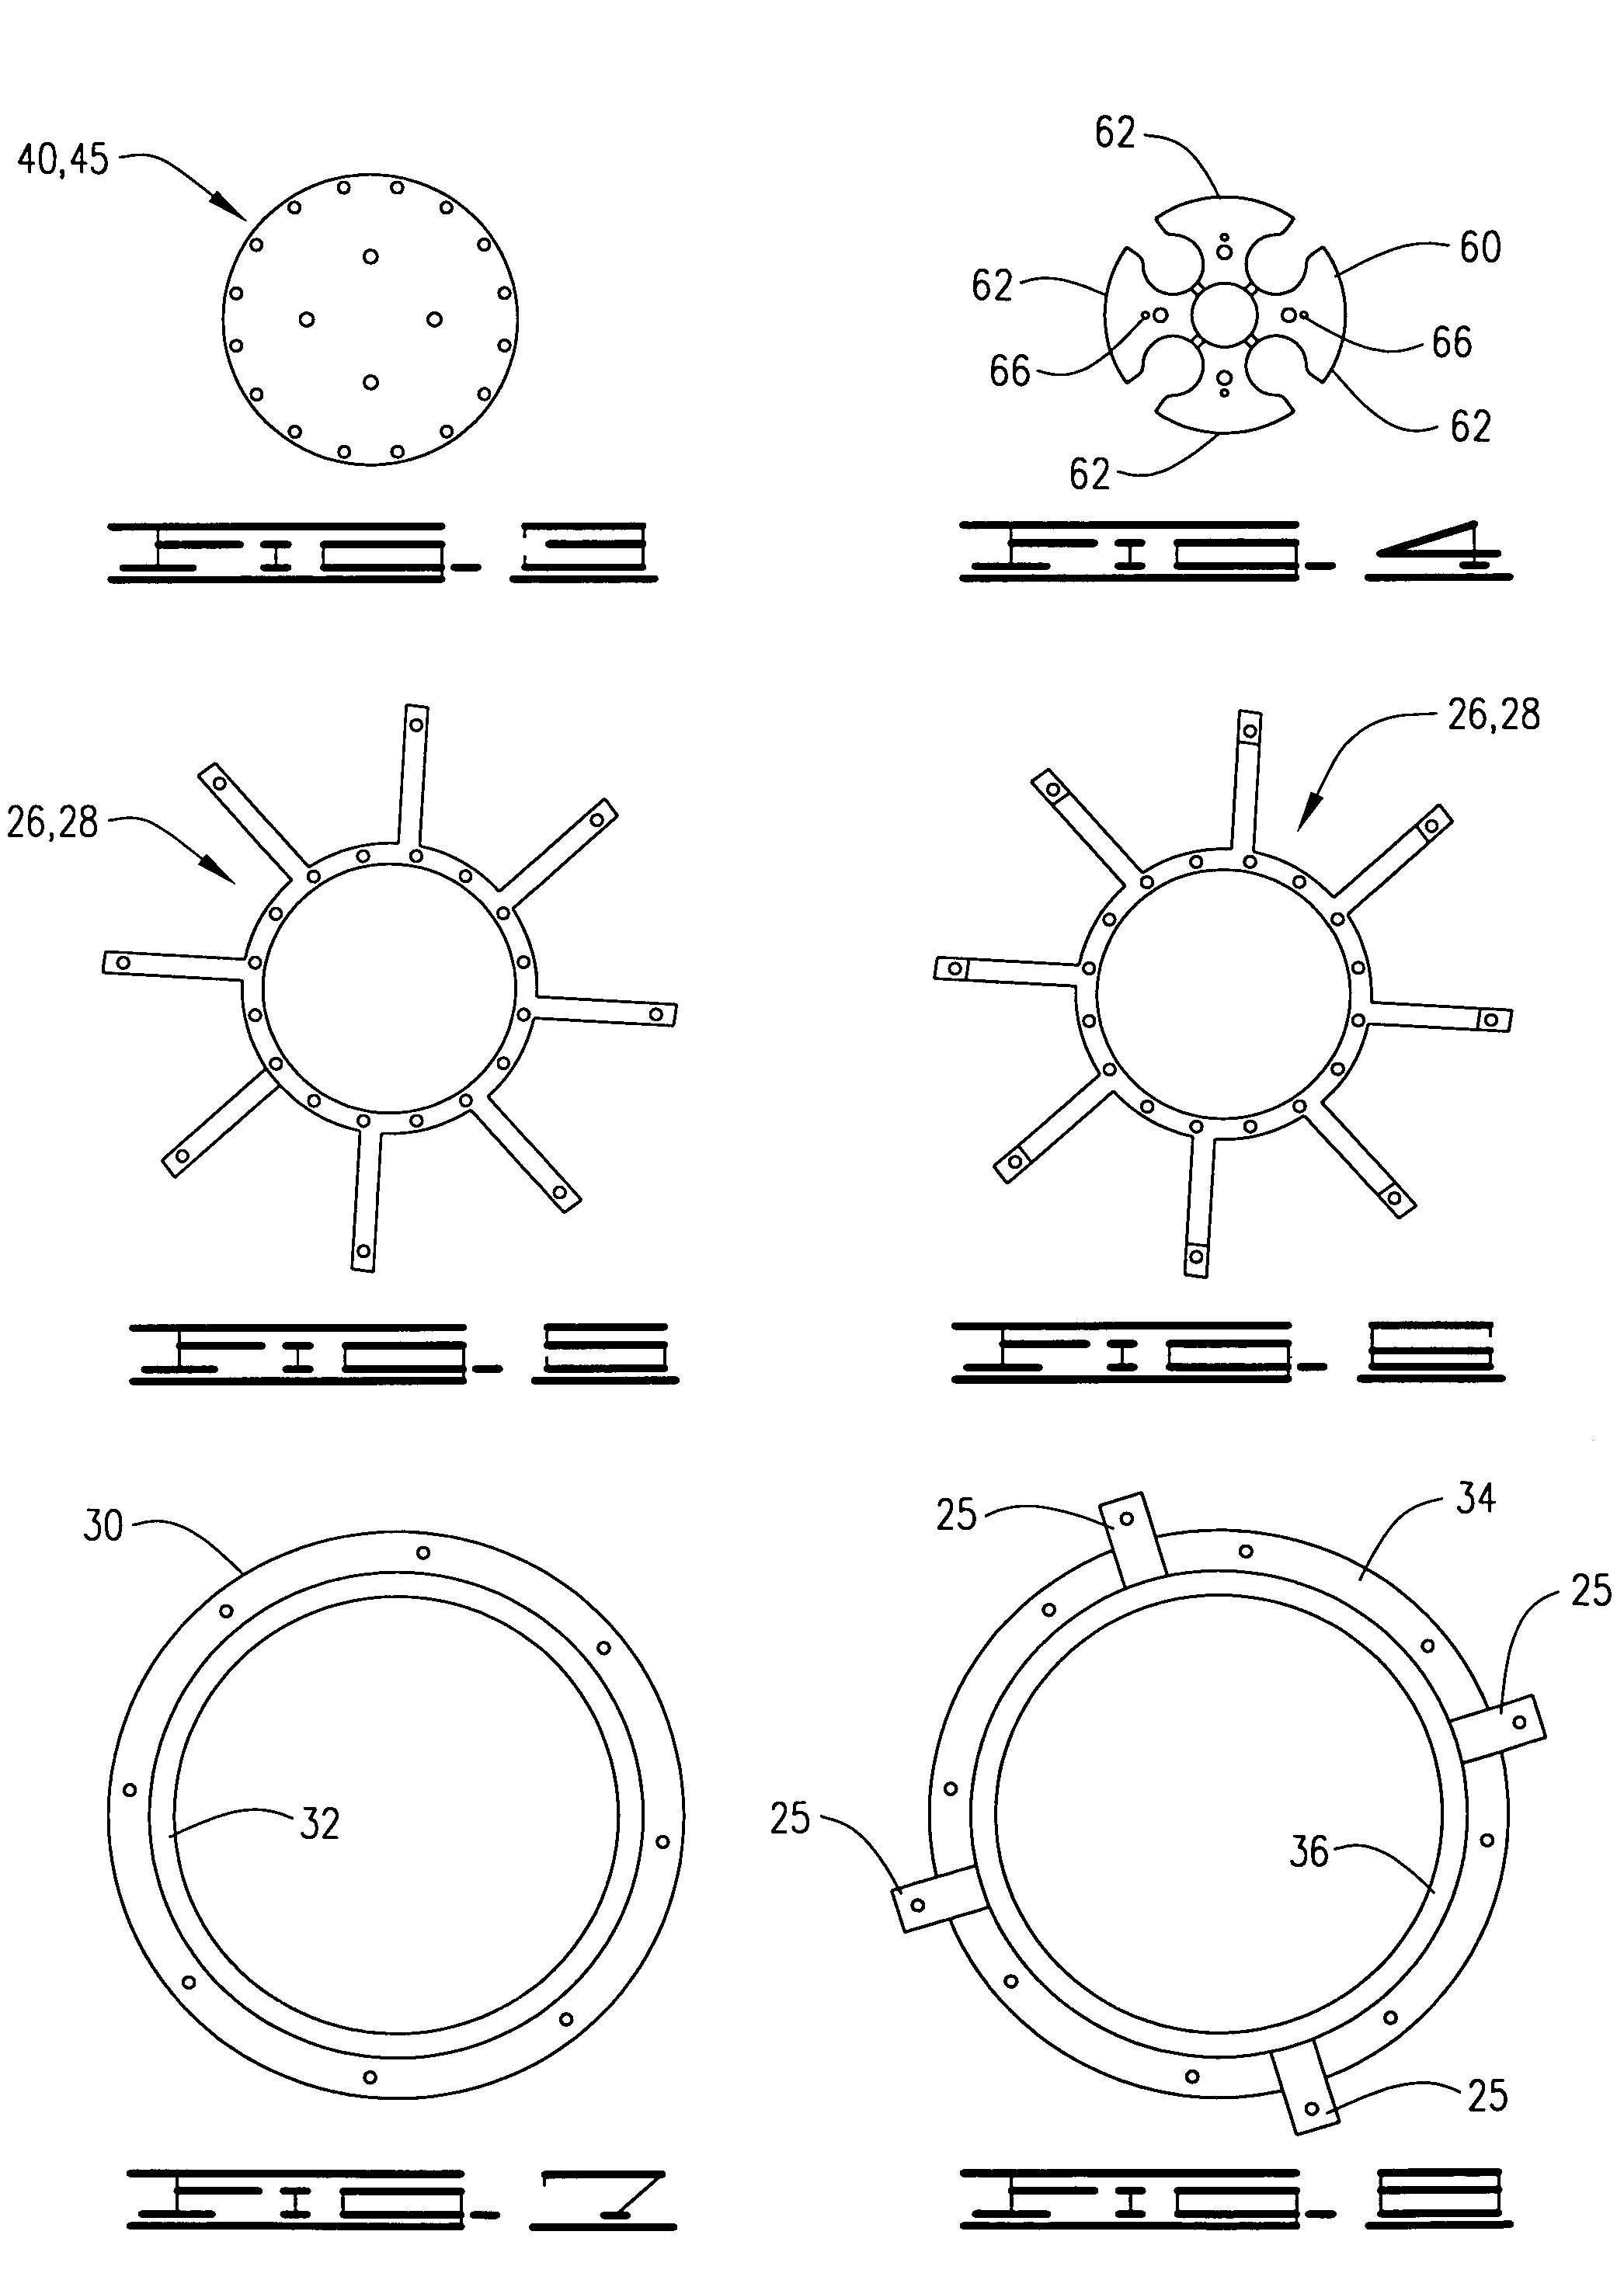 Rotational magnetic electrical generating device